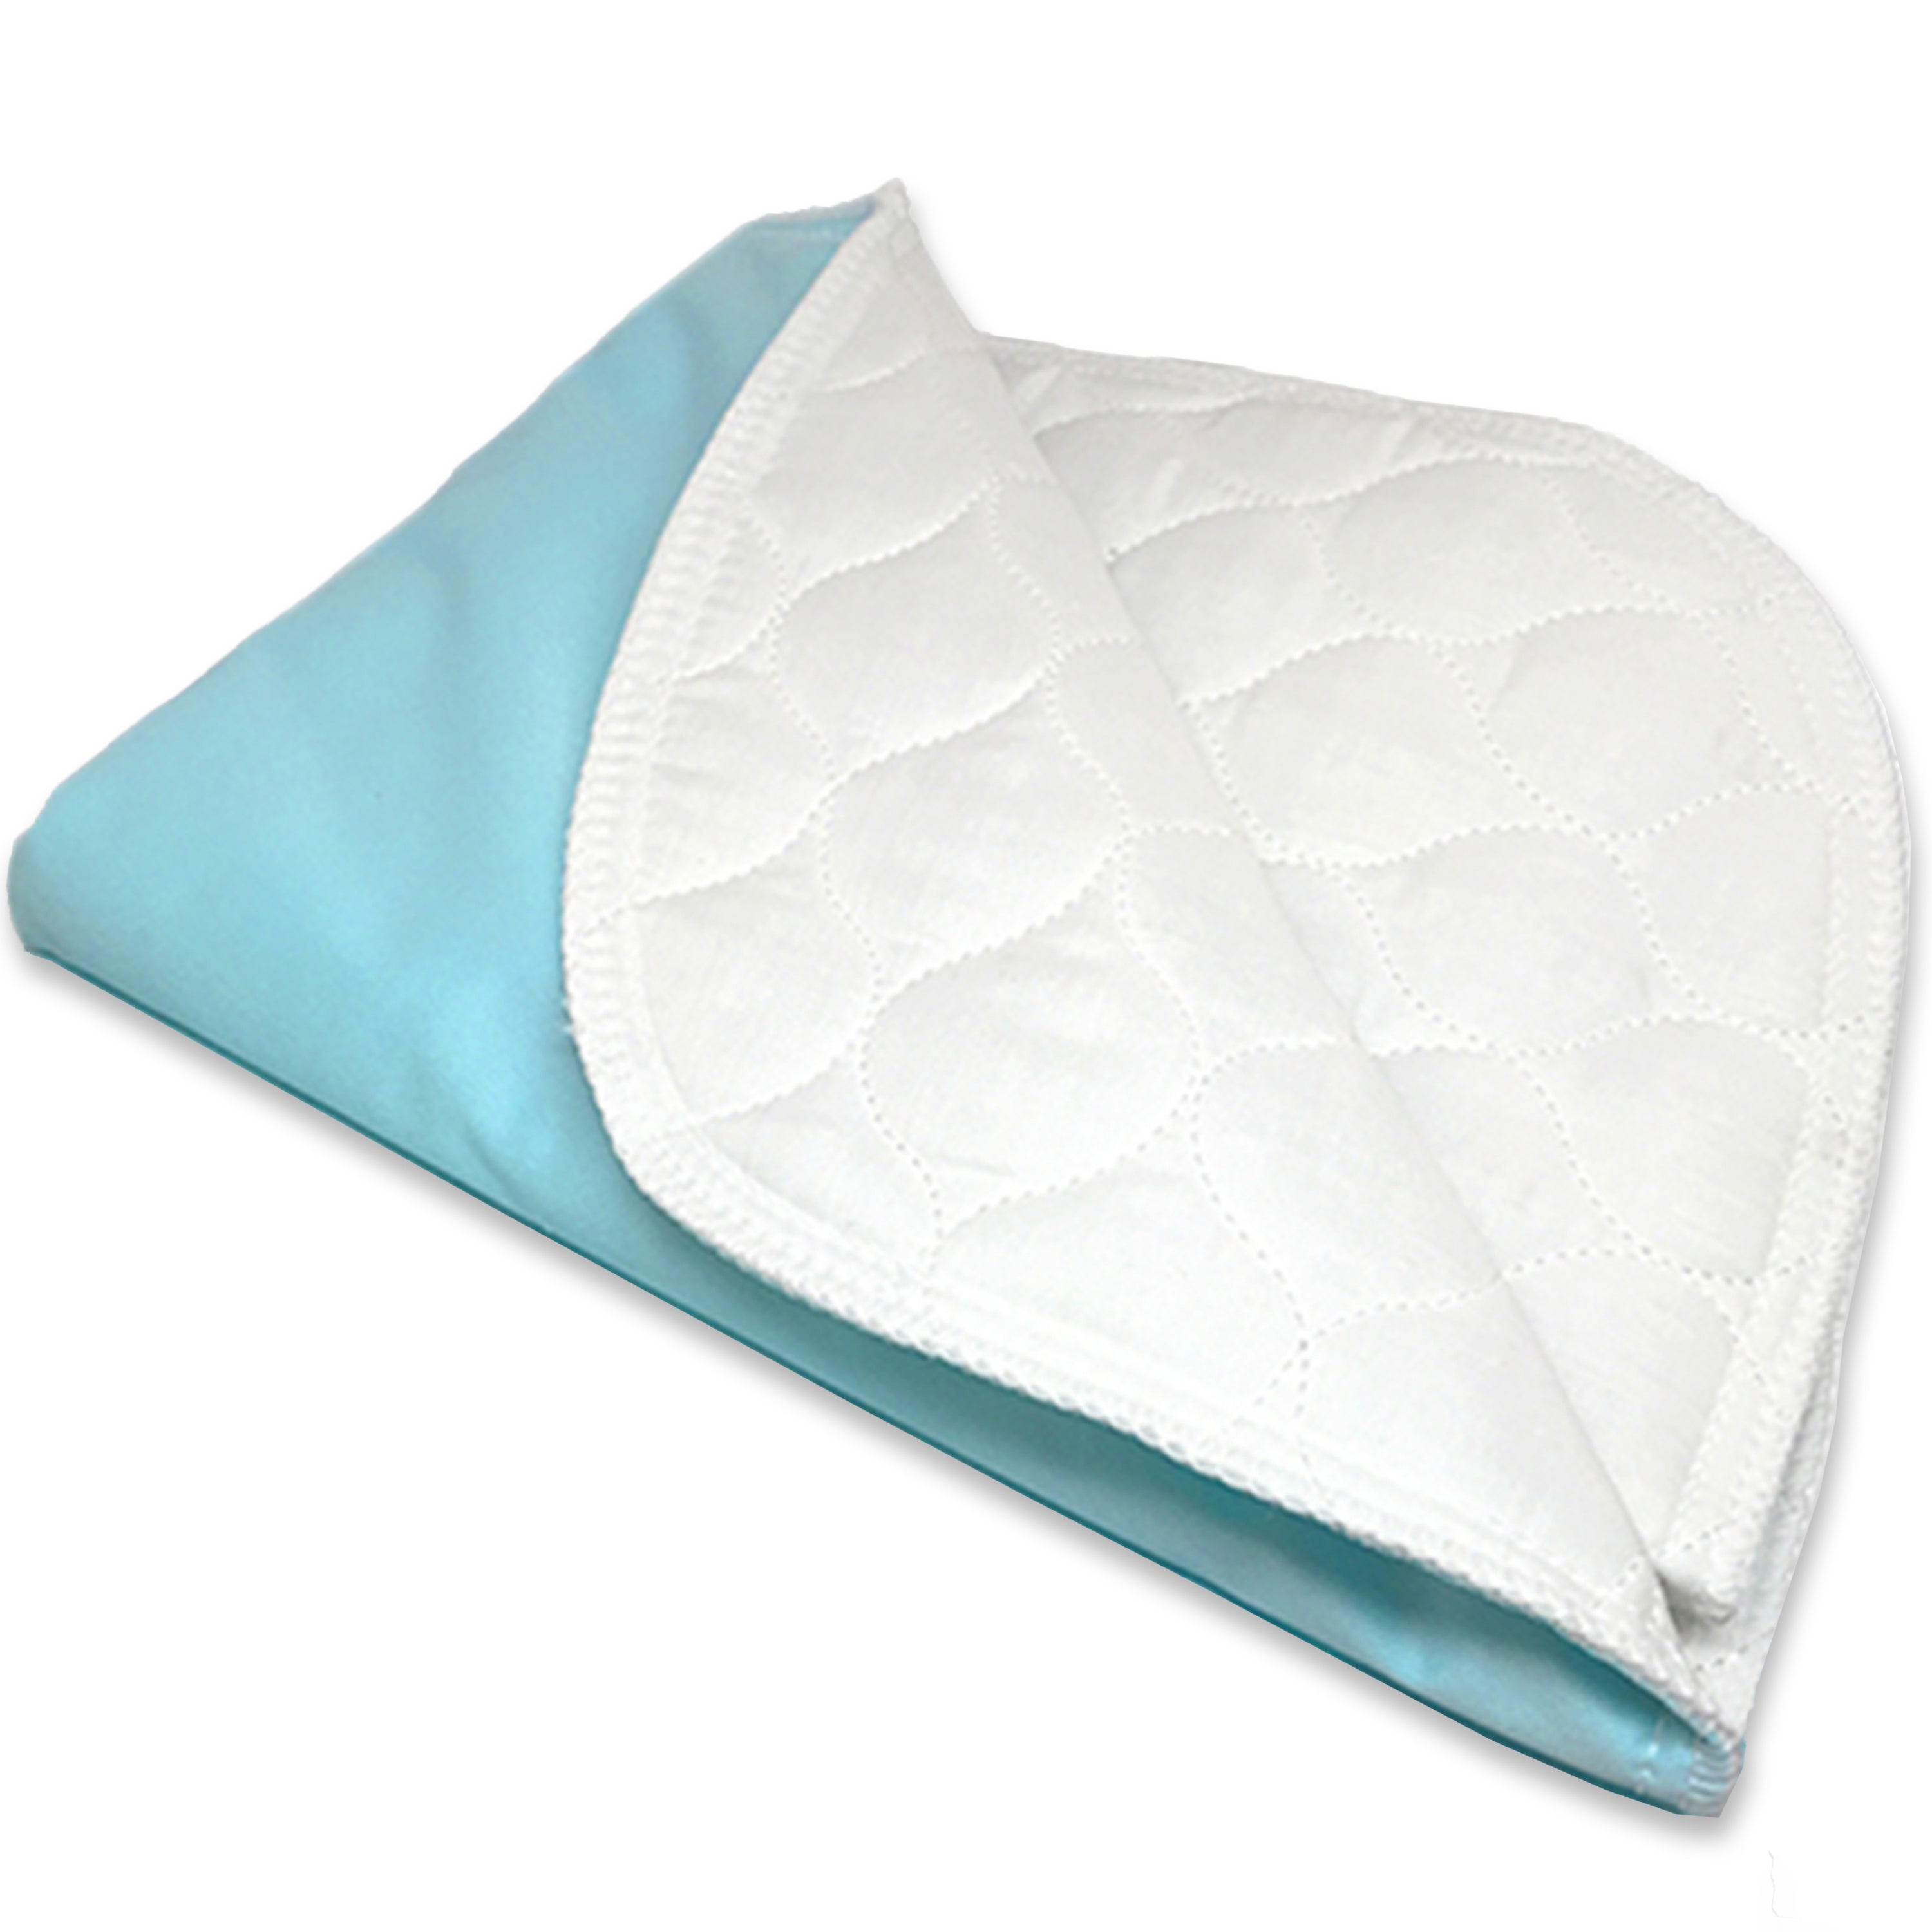 Careoutfit Washable Bed Pads/Reusable Incontinence Underpads